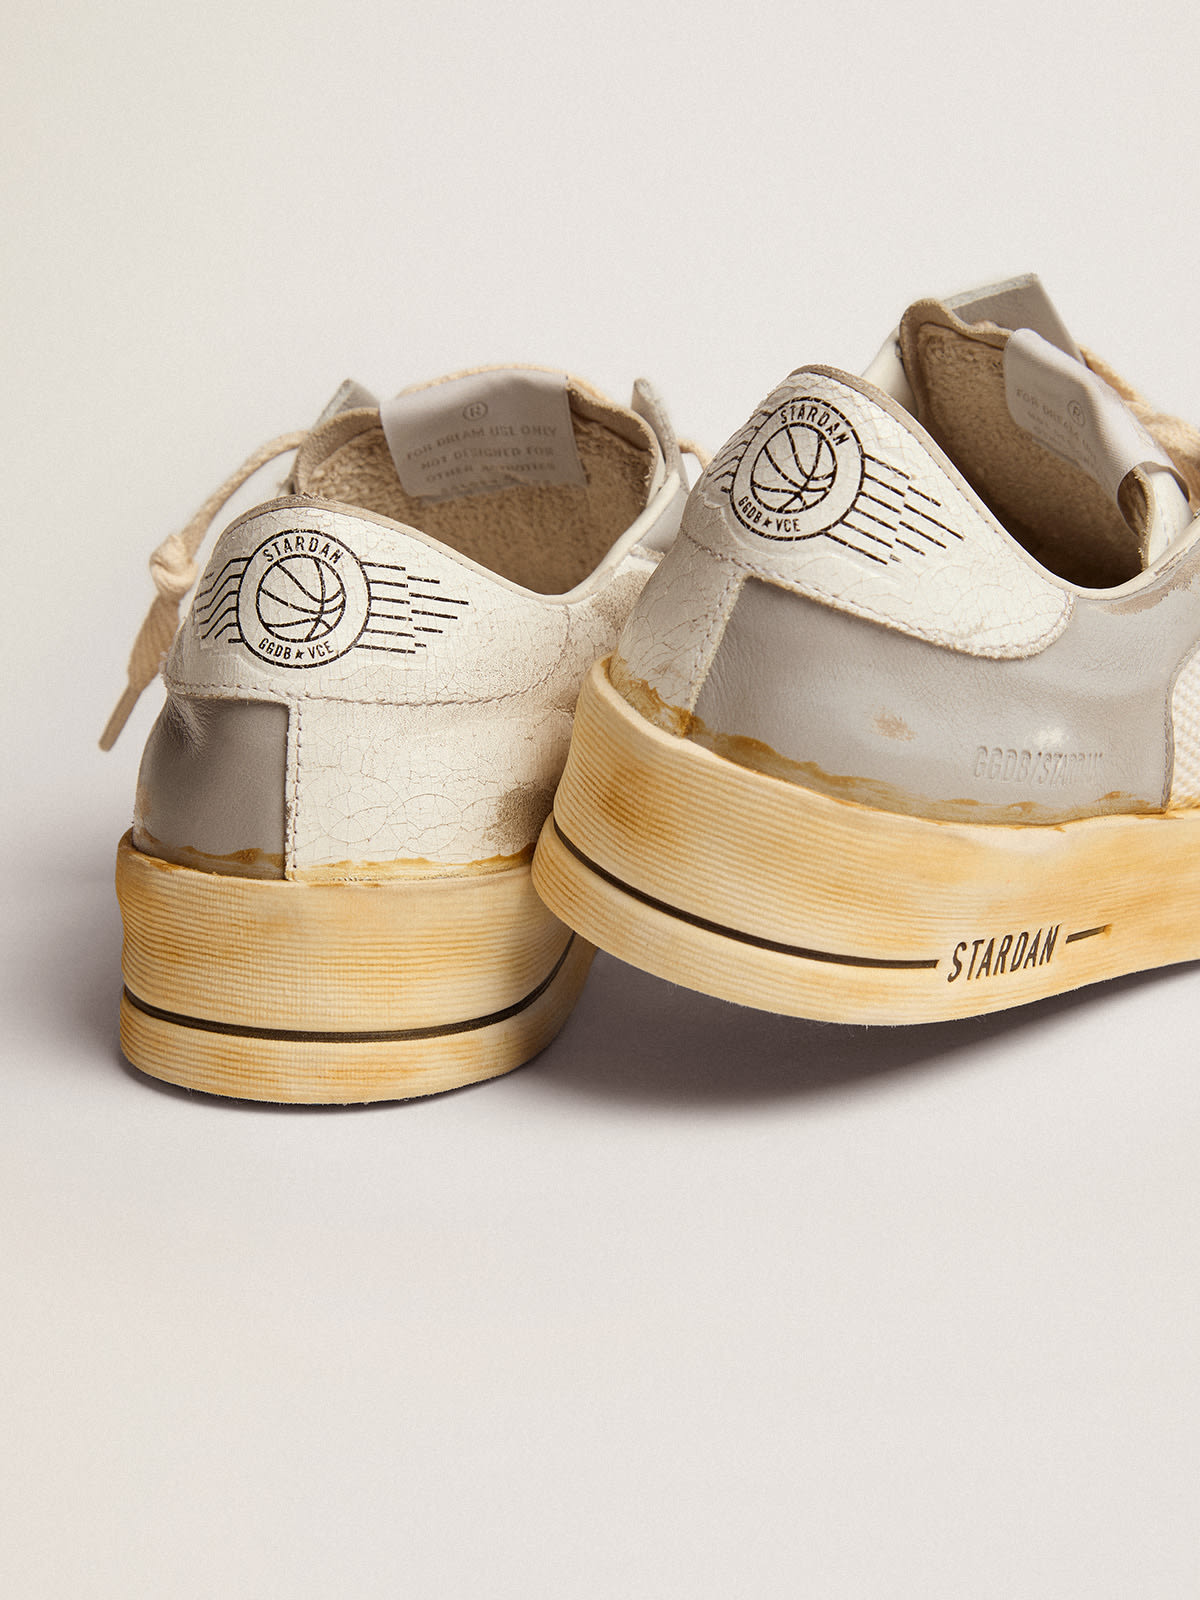 Golden Goose - Stardan sneakers with white leather star with GGDB print and white crackle-leather heel tab in 